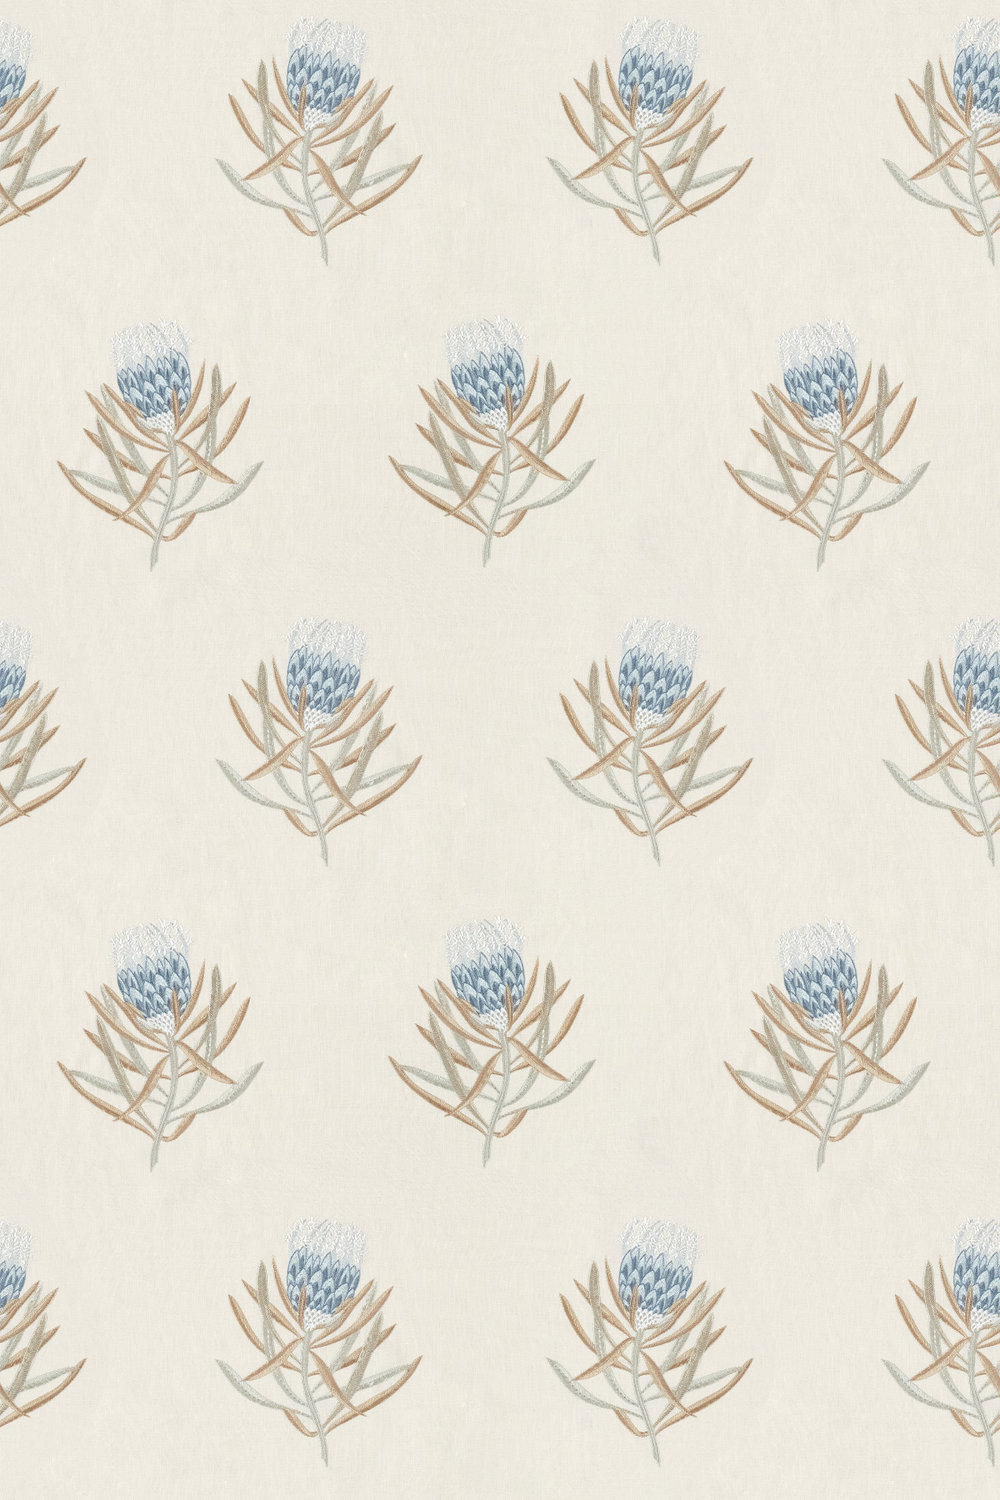 Protea Flower Fabric - China Blue / Linen - by Sanderson